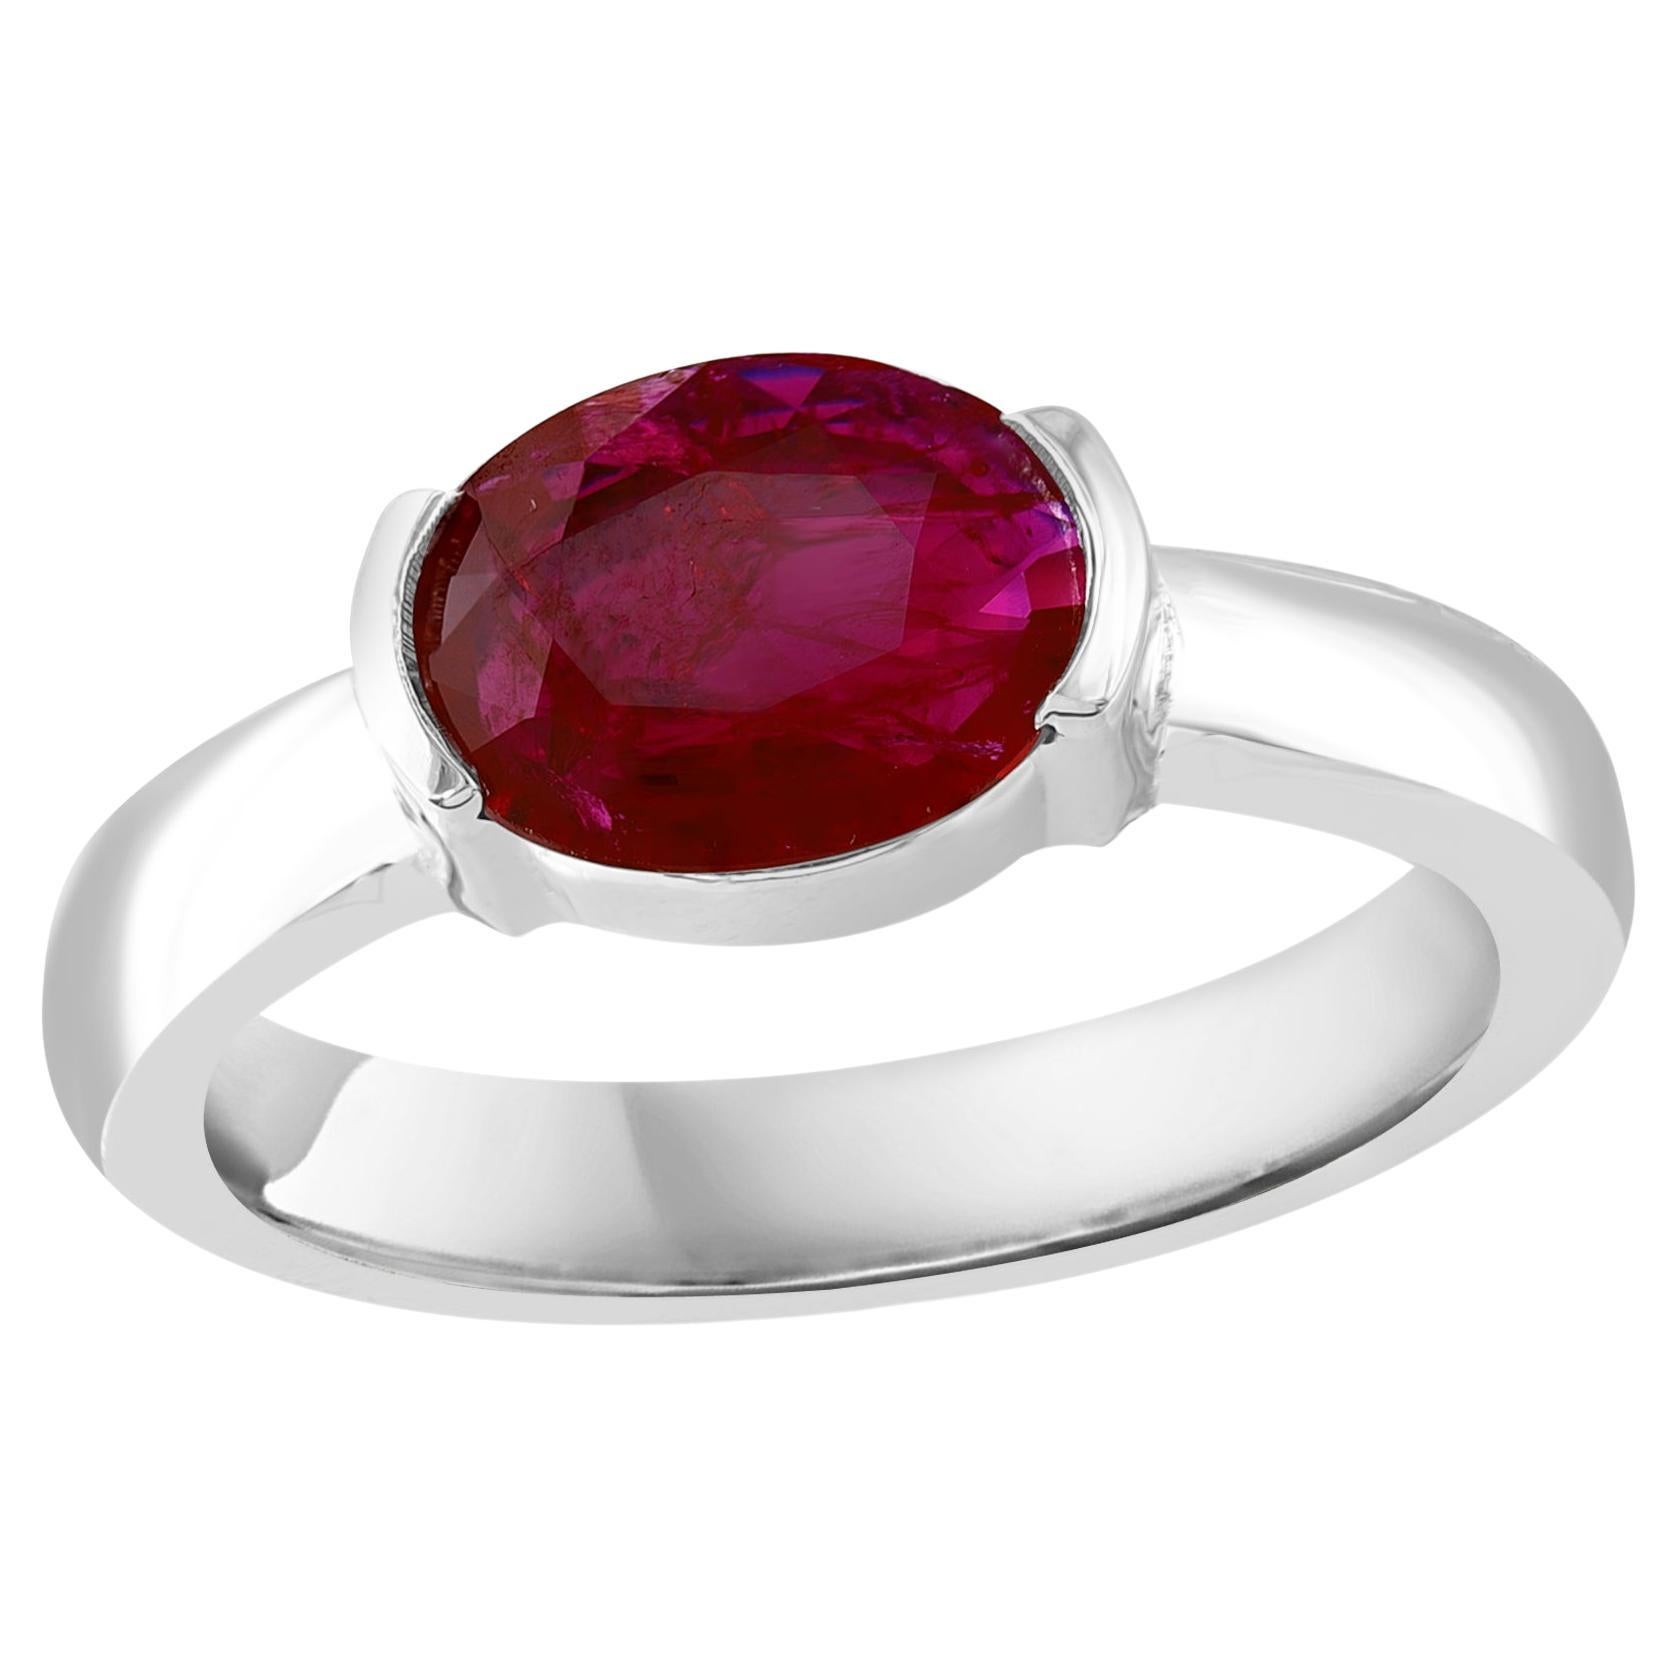 1.37 Carat Oval Cut Ruby Band Ring in 14K White Gold For Sale